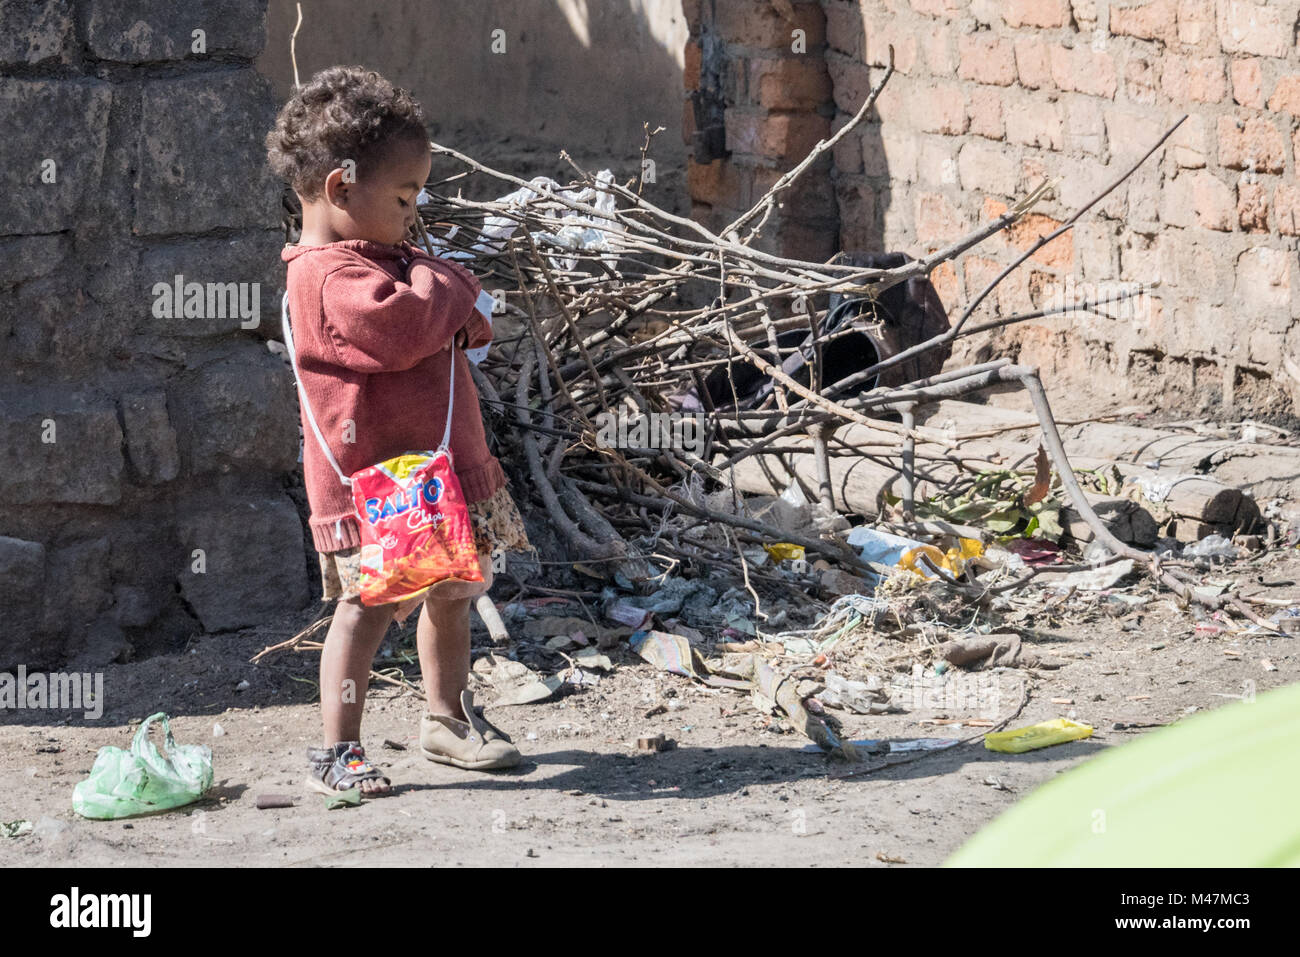 Young Girl, with Odd Shoes, Dirty Coat and Bag in Dust and Rubbish at Roadside, Madagascar Stock Photo